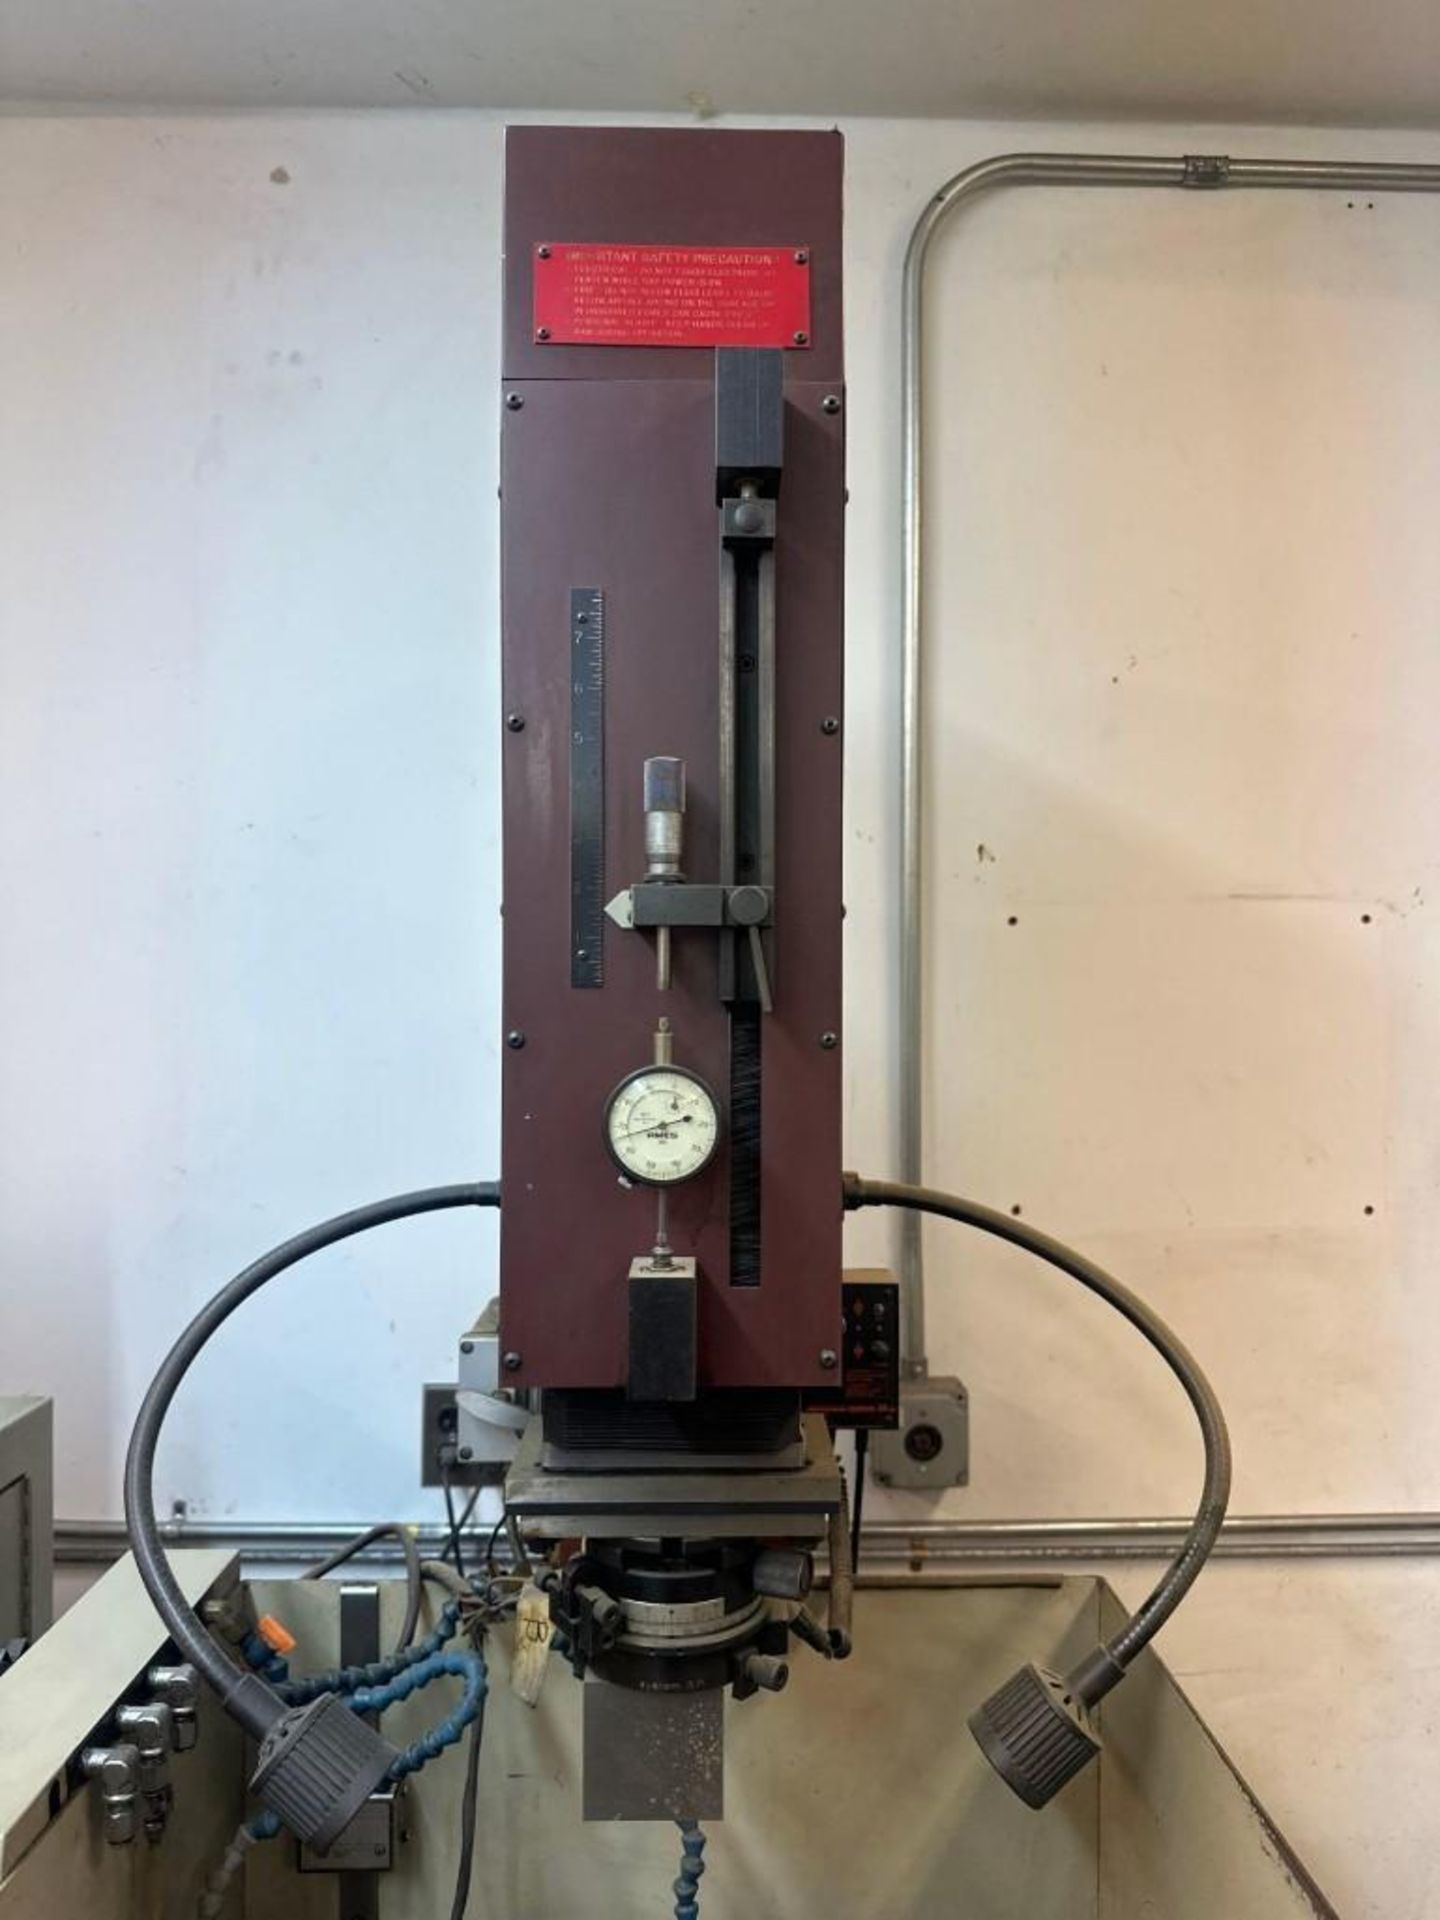 Hansvedt Benchman Sinker EDM, 20 Amps, Table Size: 9" x 14.1", X-Axis 8.4", Y-Axis 5.5" - Image 3 of 9